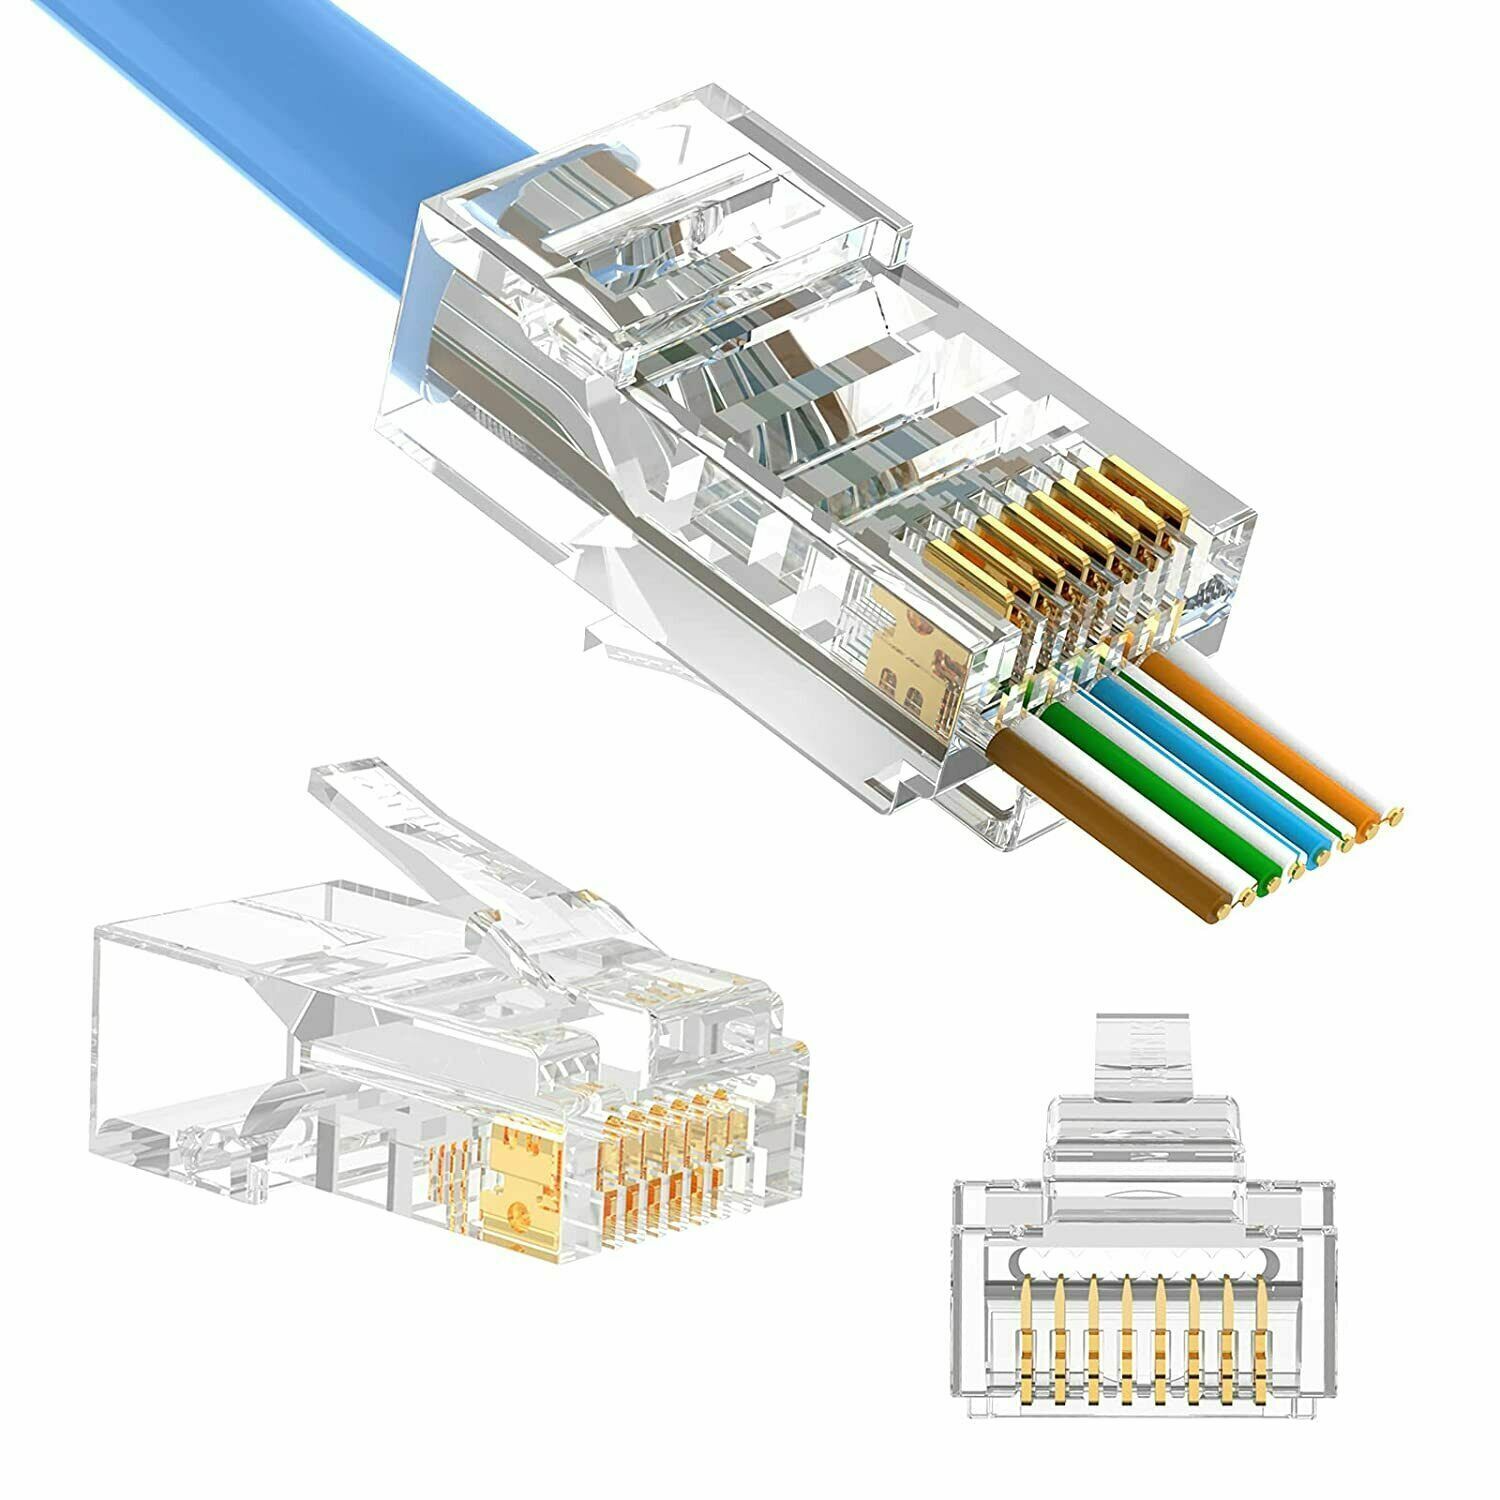 10Pc RJ45 Pass Through Modular Plug Network Cable Connector End - Click Image to Close